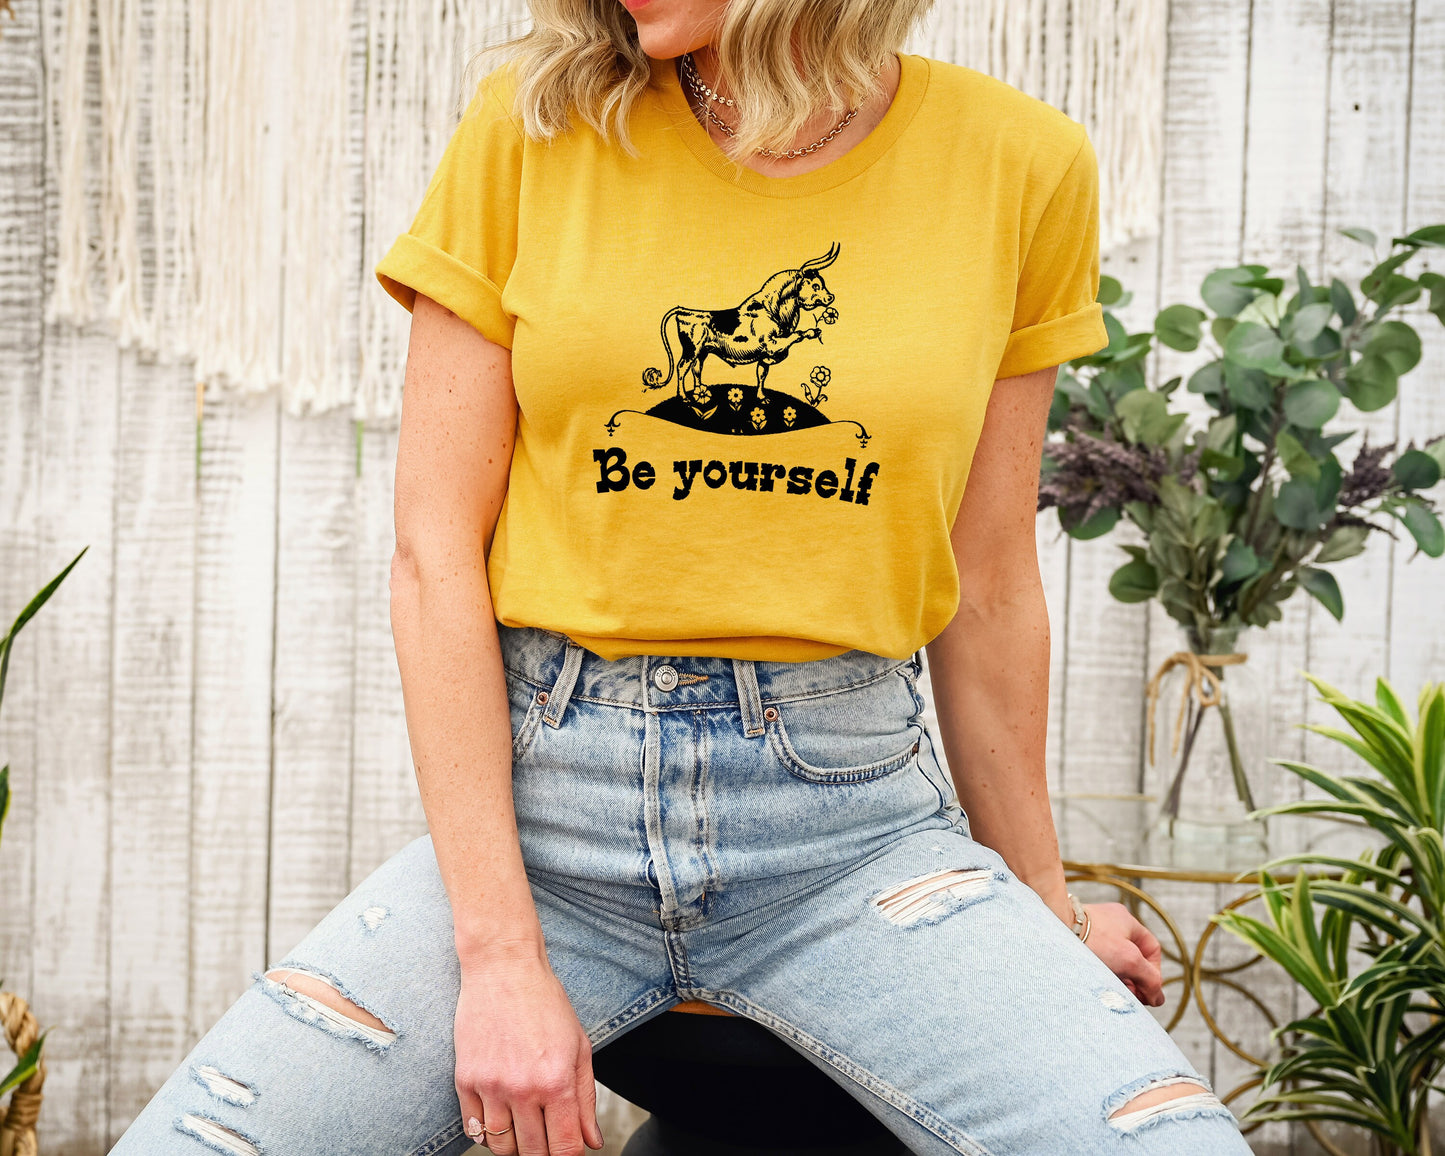 Be Yourself Bull Ferdinand Vintage Story Book Character Ultra Soft Graphic Tee Unisex Soft Tee T-shirt for Women or Men